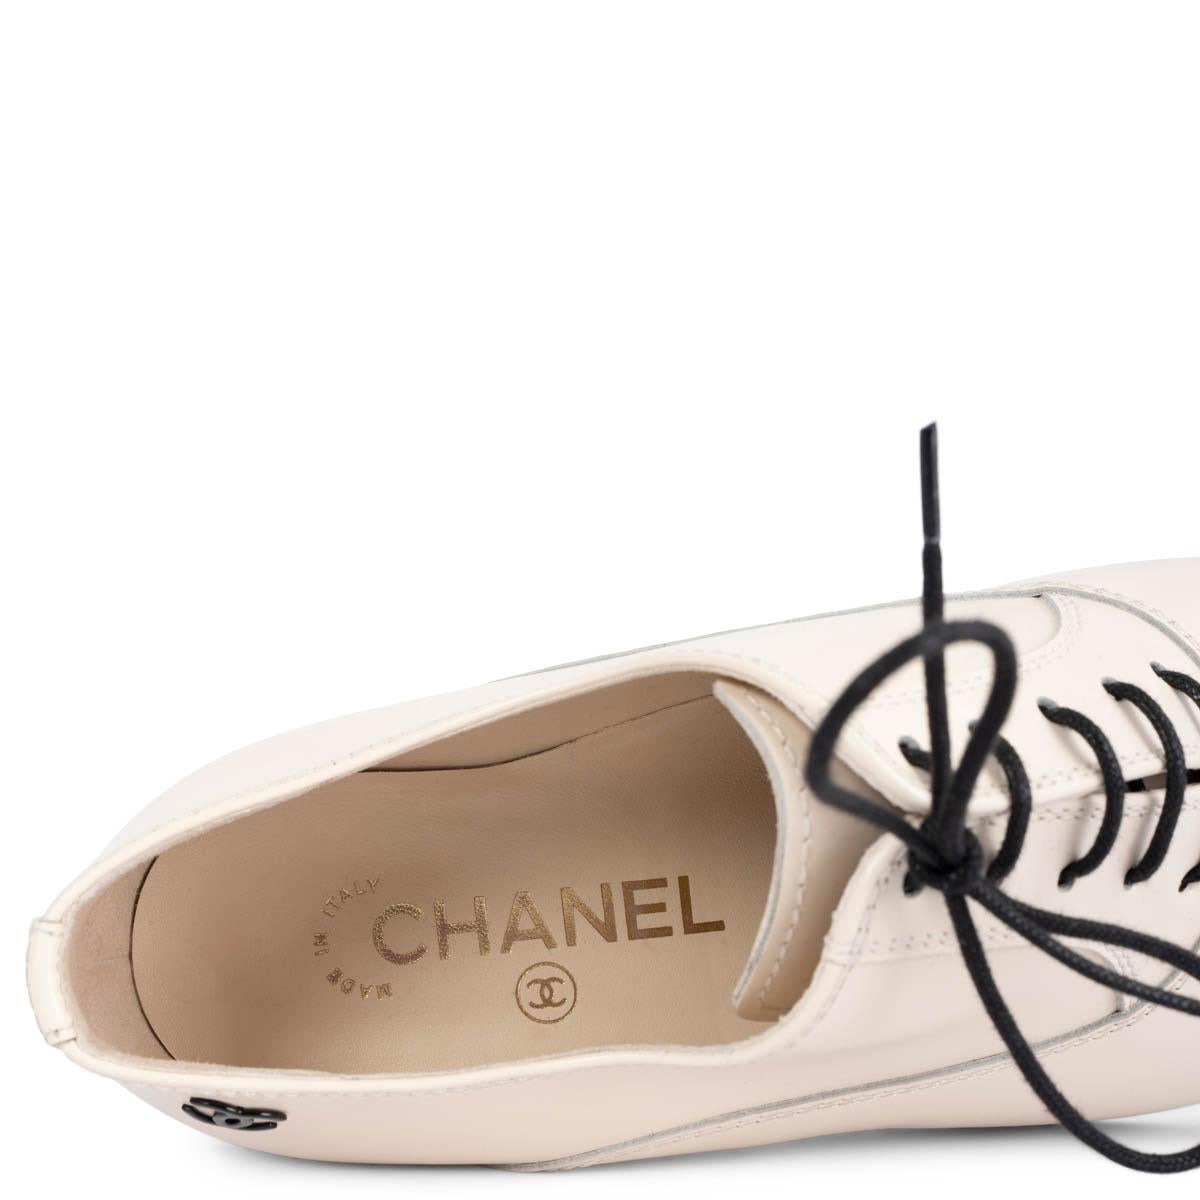 CHANEL ivory leather 2022 22S LACE UP BLOCK HEEL DERBIES Flats Shoes 37 2